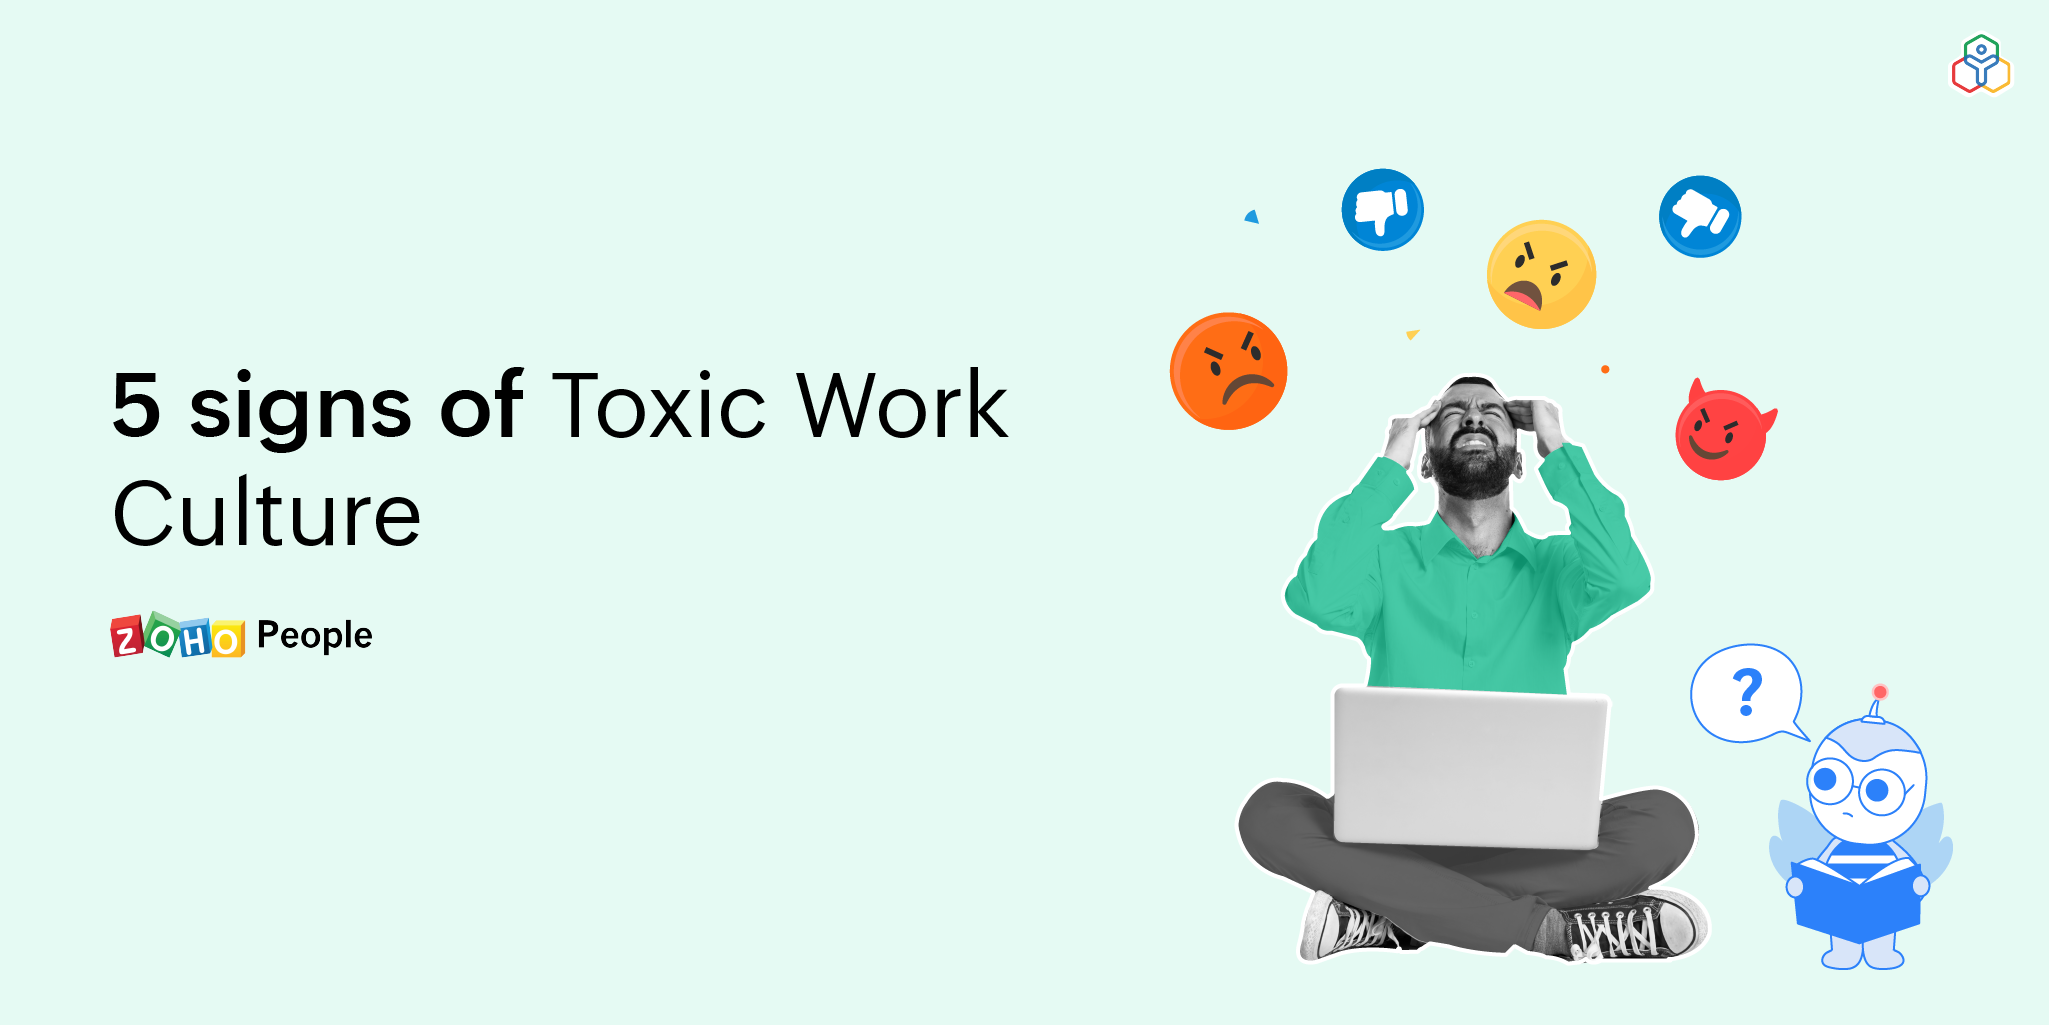 5 signs of a toxic work culture